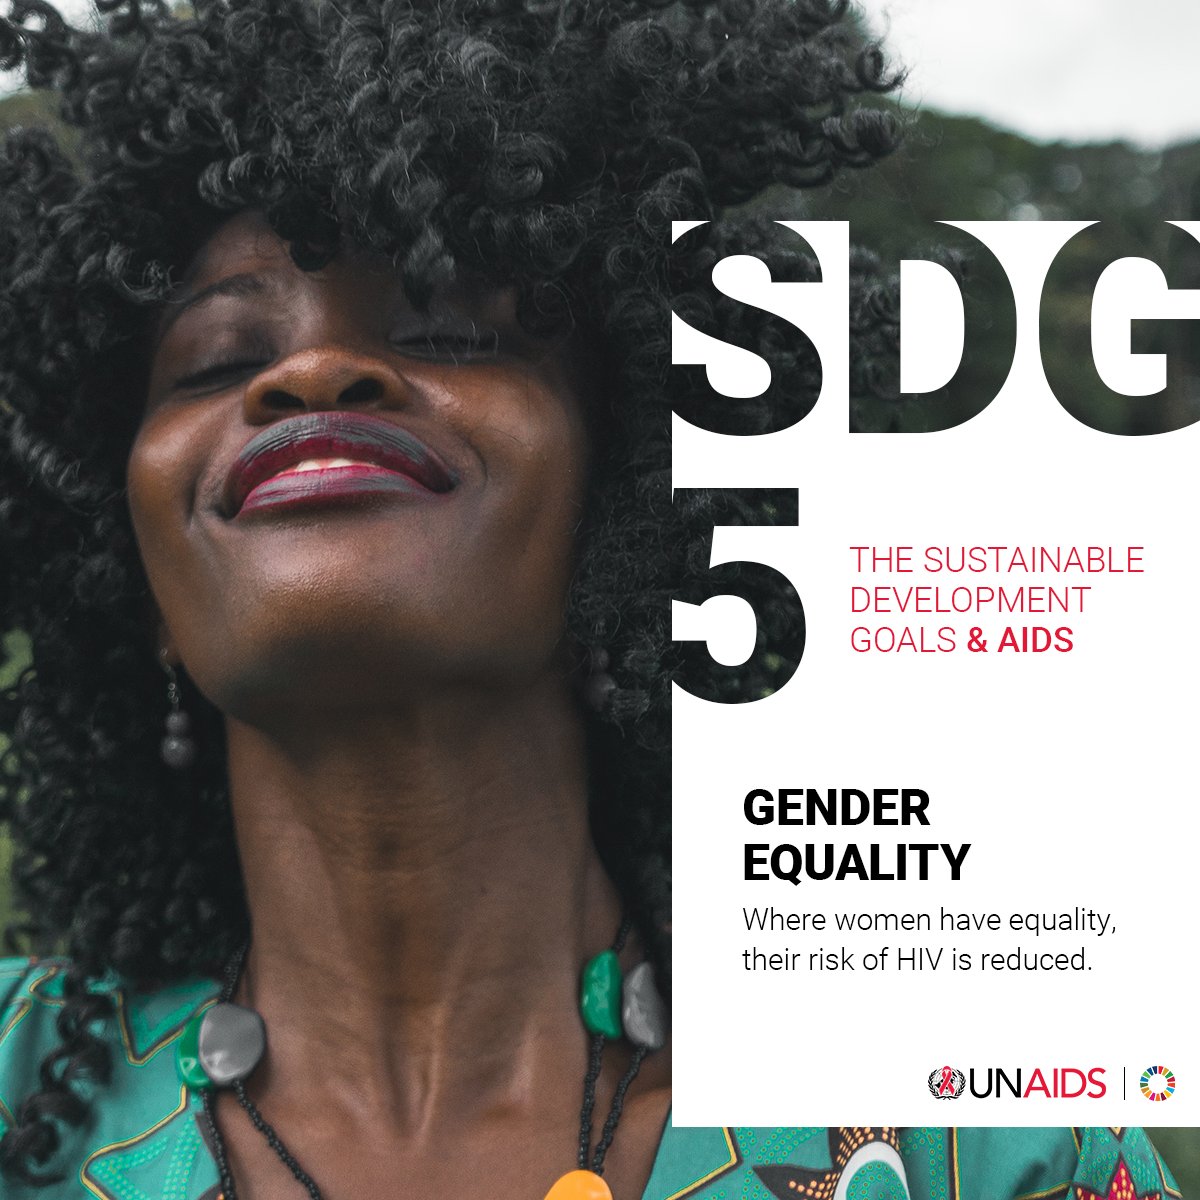 Gender inequality & discrimination undermine the progress of the #HIV response. Let’s #EndInequalities for a free #AIDS generation.

Achieving gender equality, empowering women & addressing #SRHR issues faced by women & girls are crucial to achieving #SDG5 & #endingAIDS.